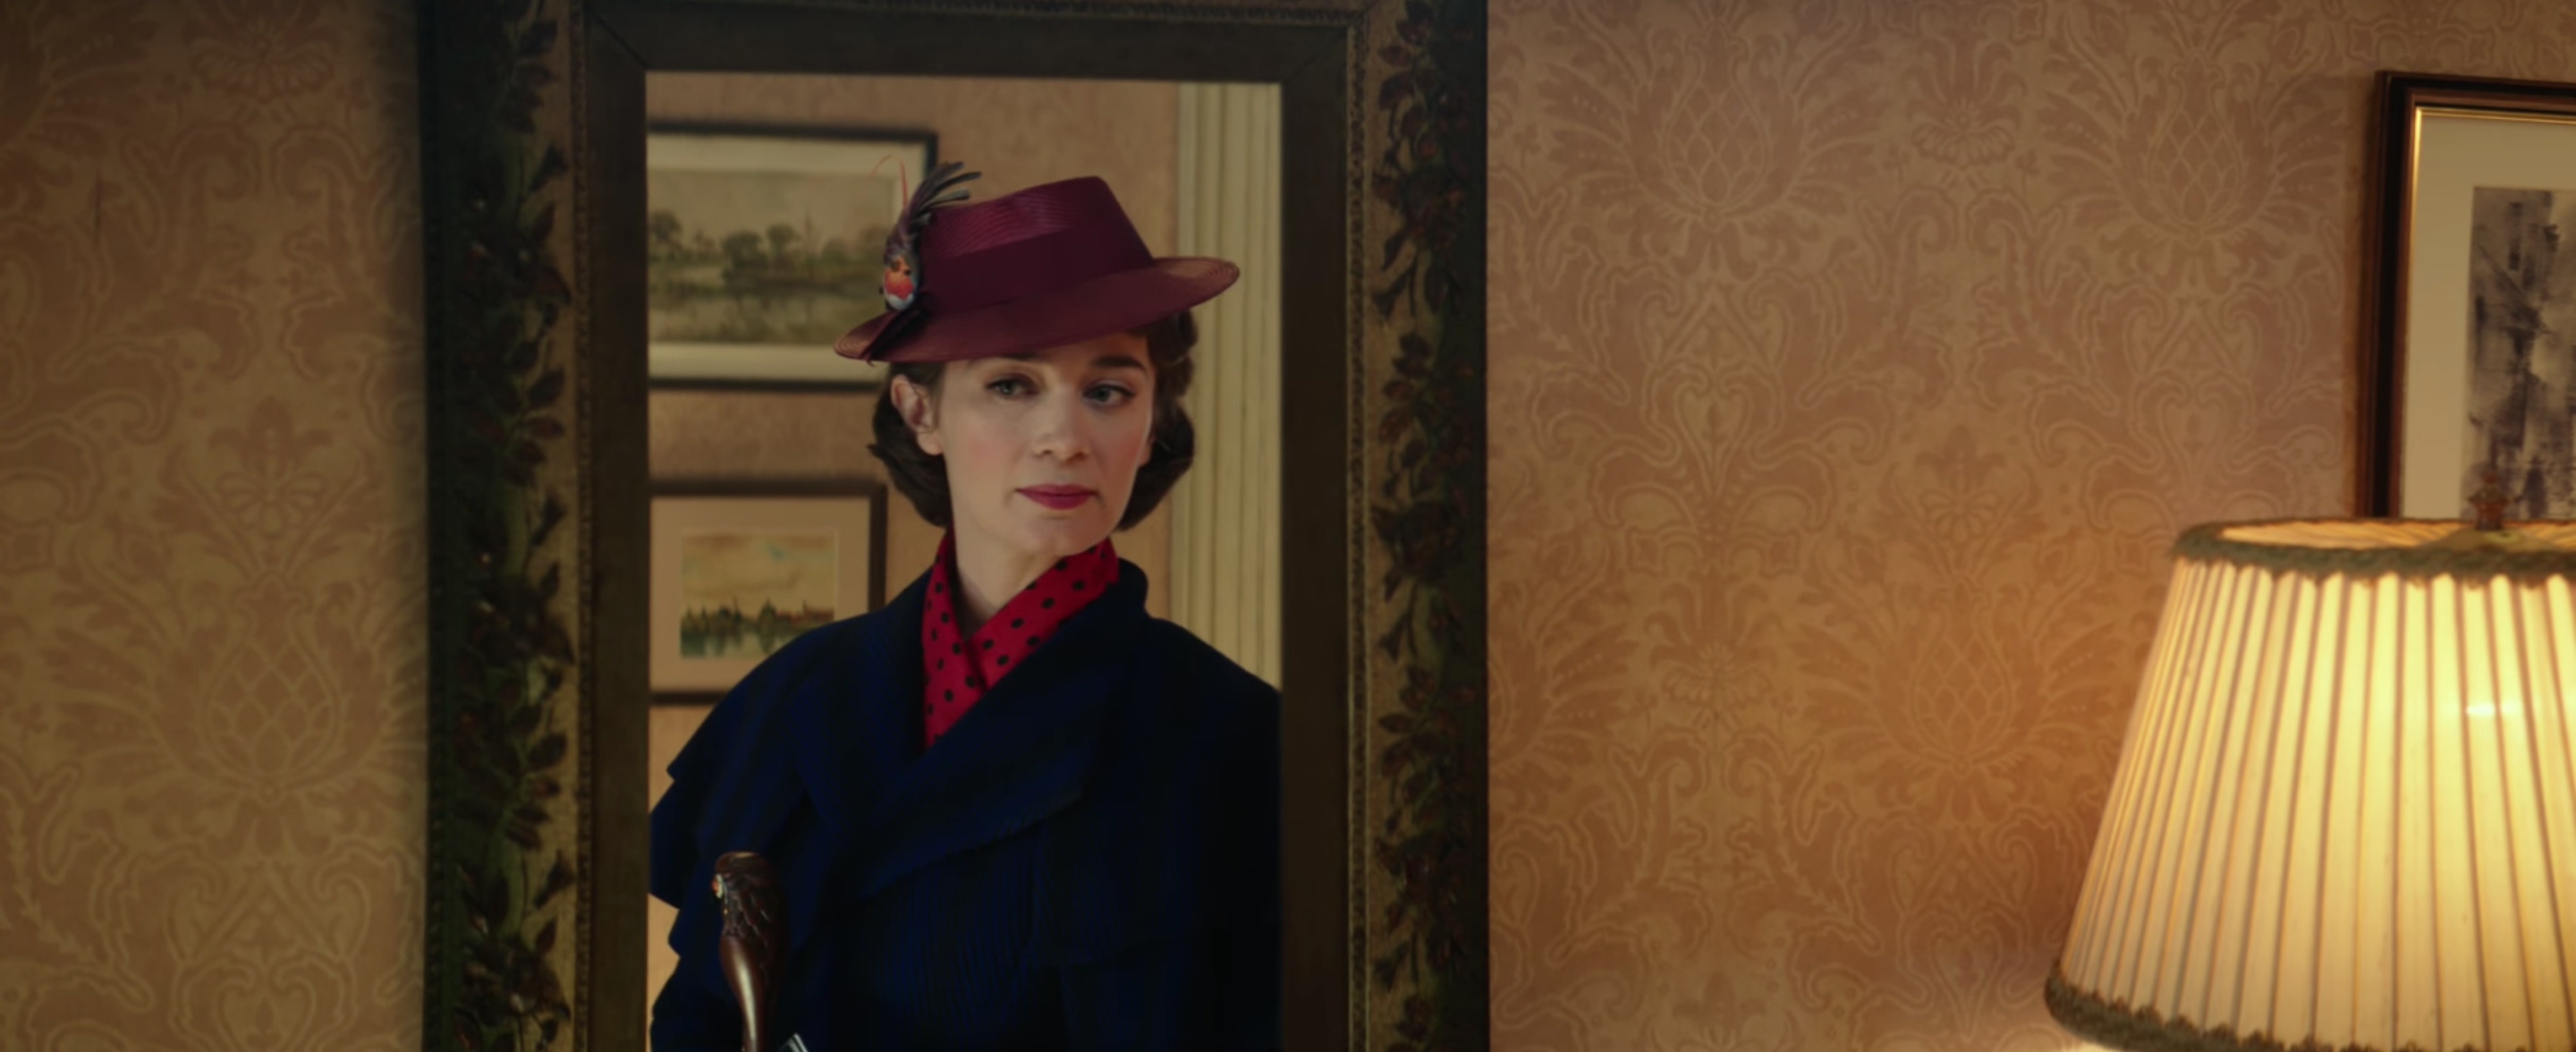 Mary Poppins Returns, 2018 Movie, Emily Blunt, Timely release, 2880x1180 Dual Screen Desktop